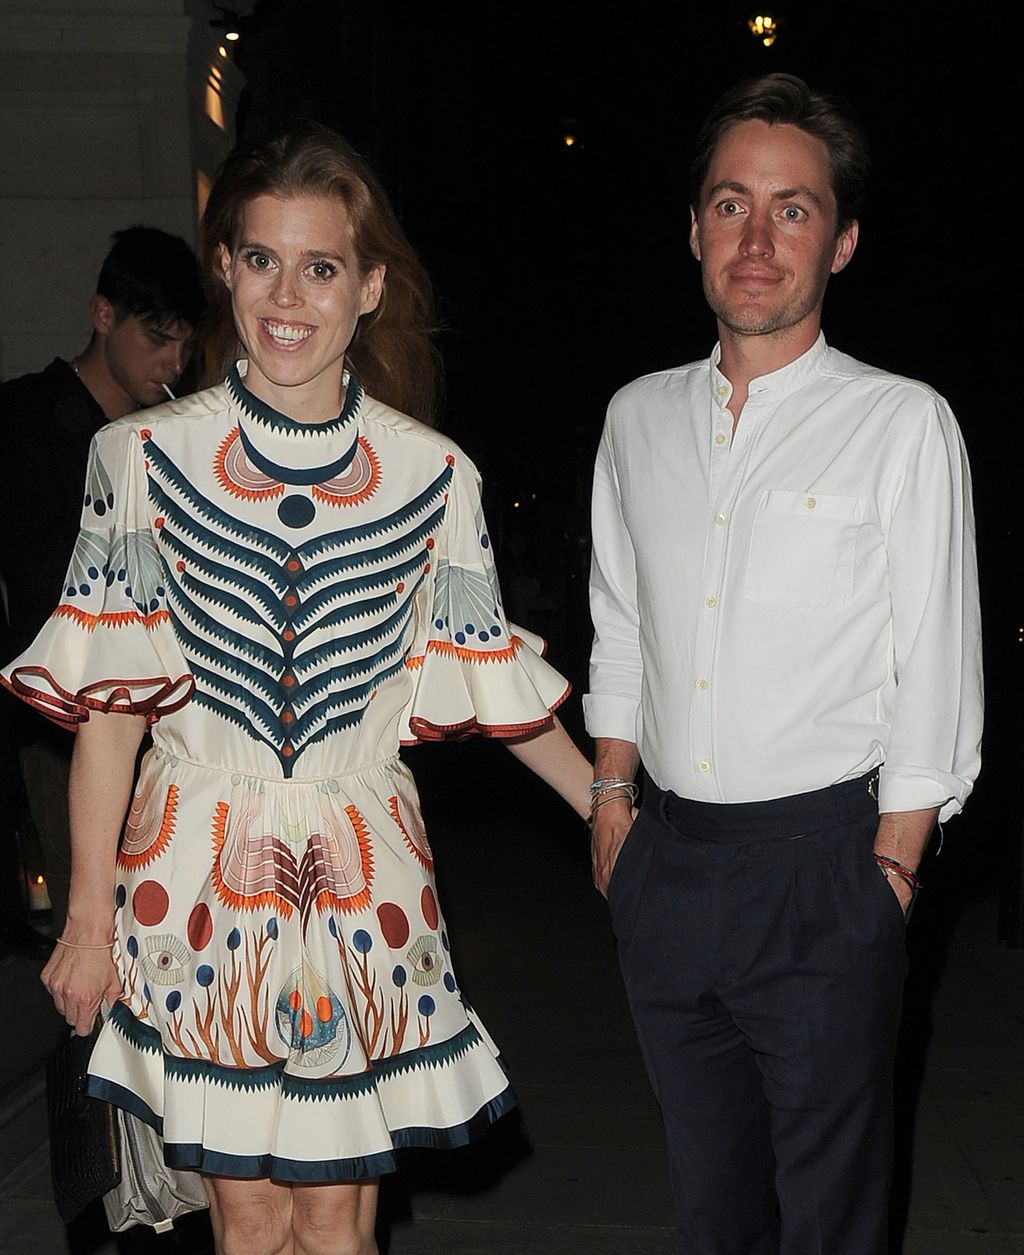 Princess Beatrice and Edoardo Mapelli Mozzi attended the star-studded event